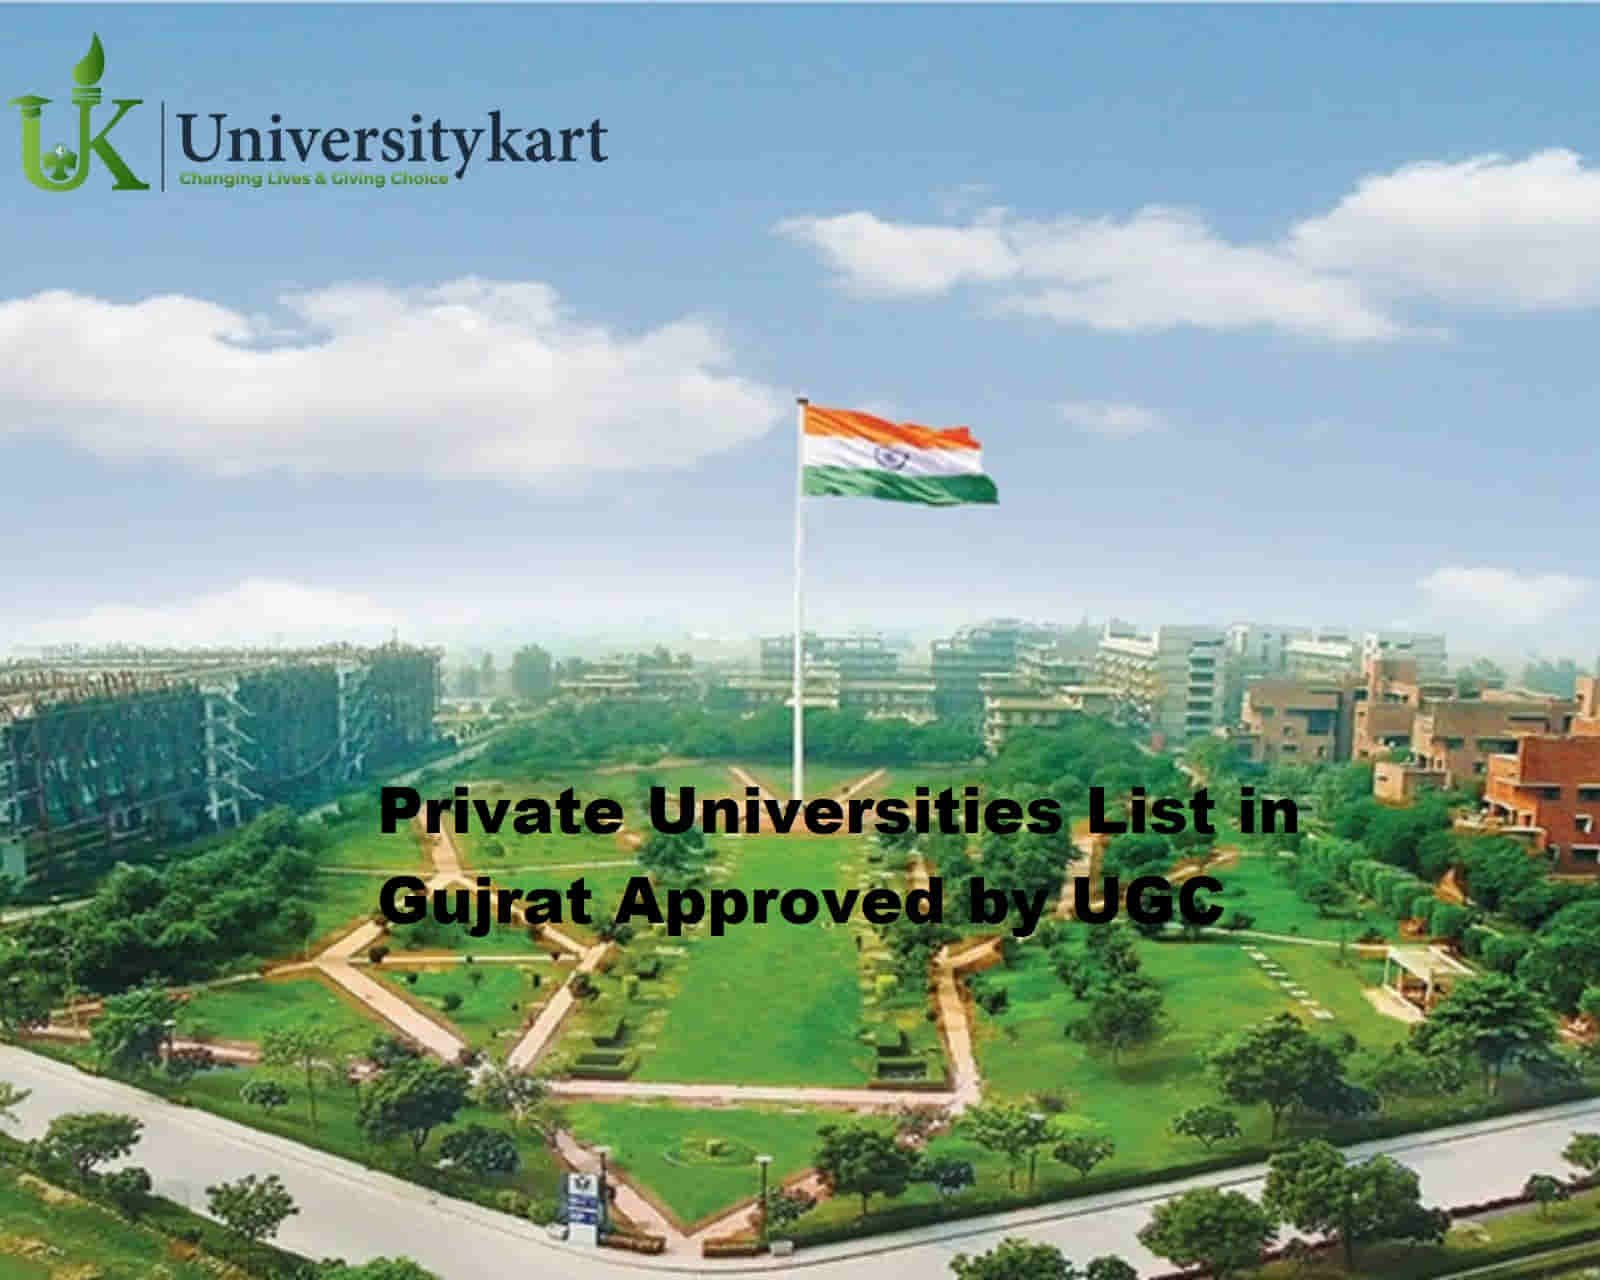 Private Universities List in Gujarat Approved by UGC